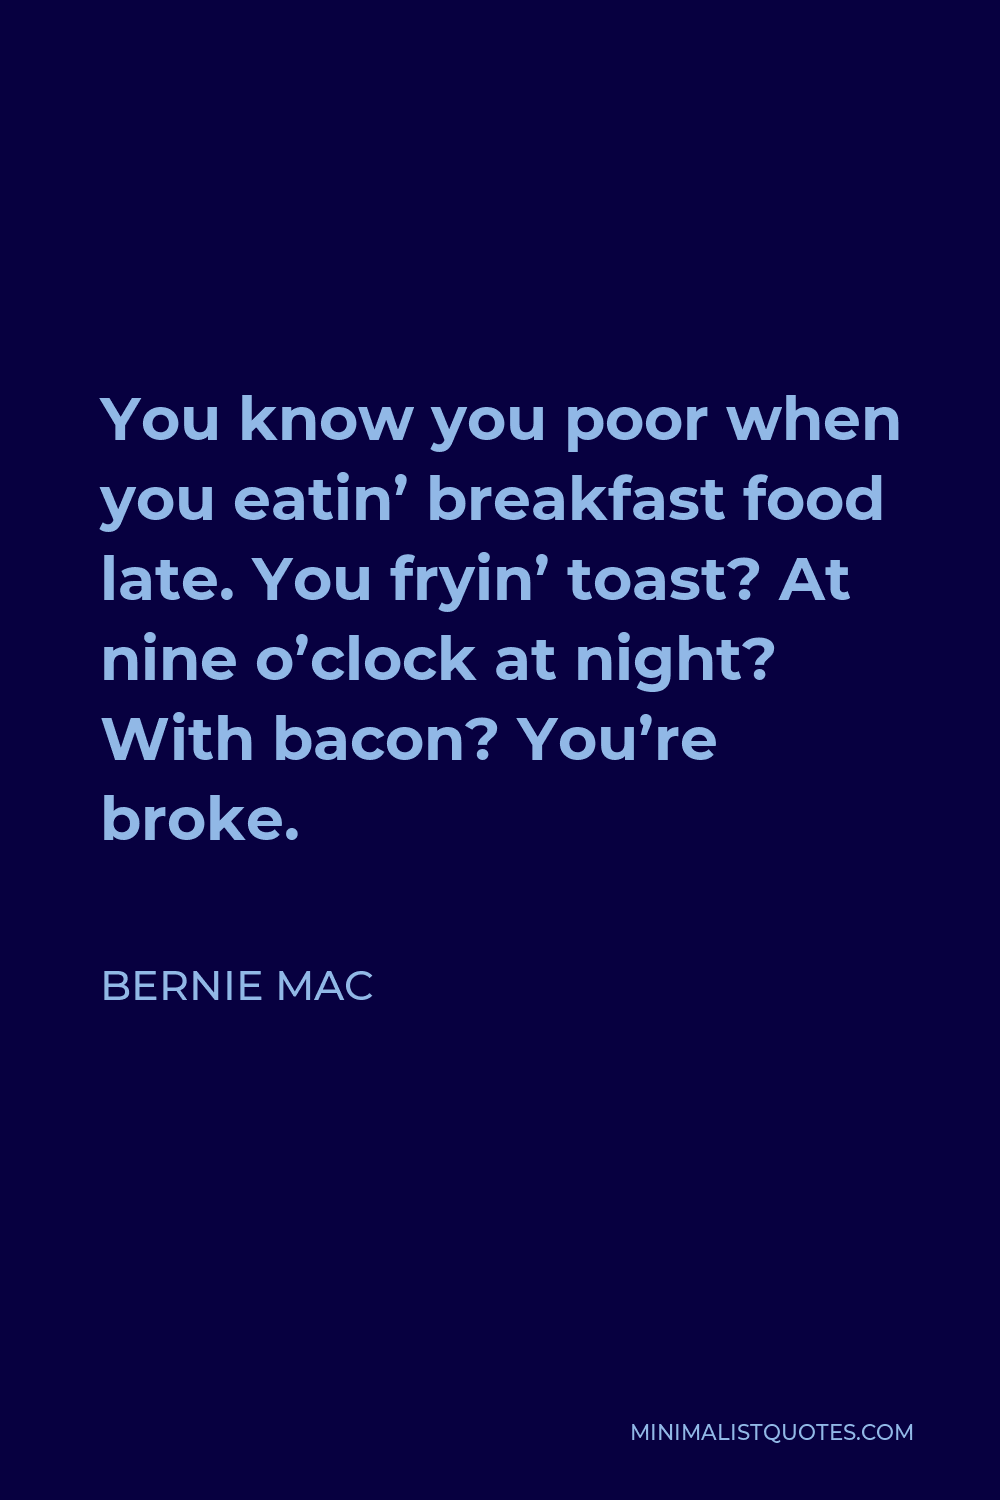 Bernie Mac Quote - You know you poor when you eatin’ breakfast food late. You fryin’ toast? At nine o’clock at night? With bacon? You’re broke.